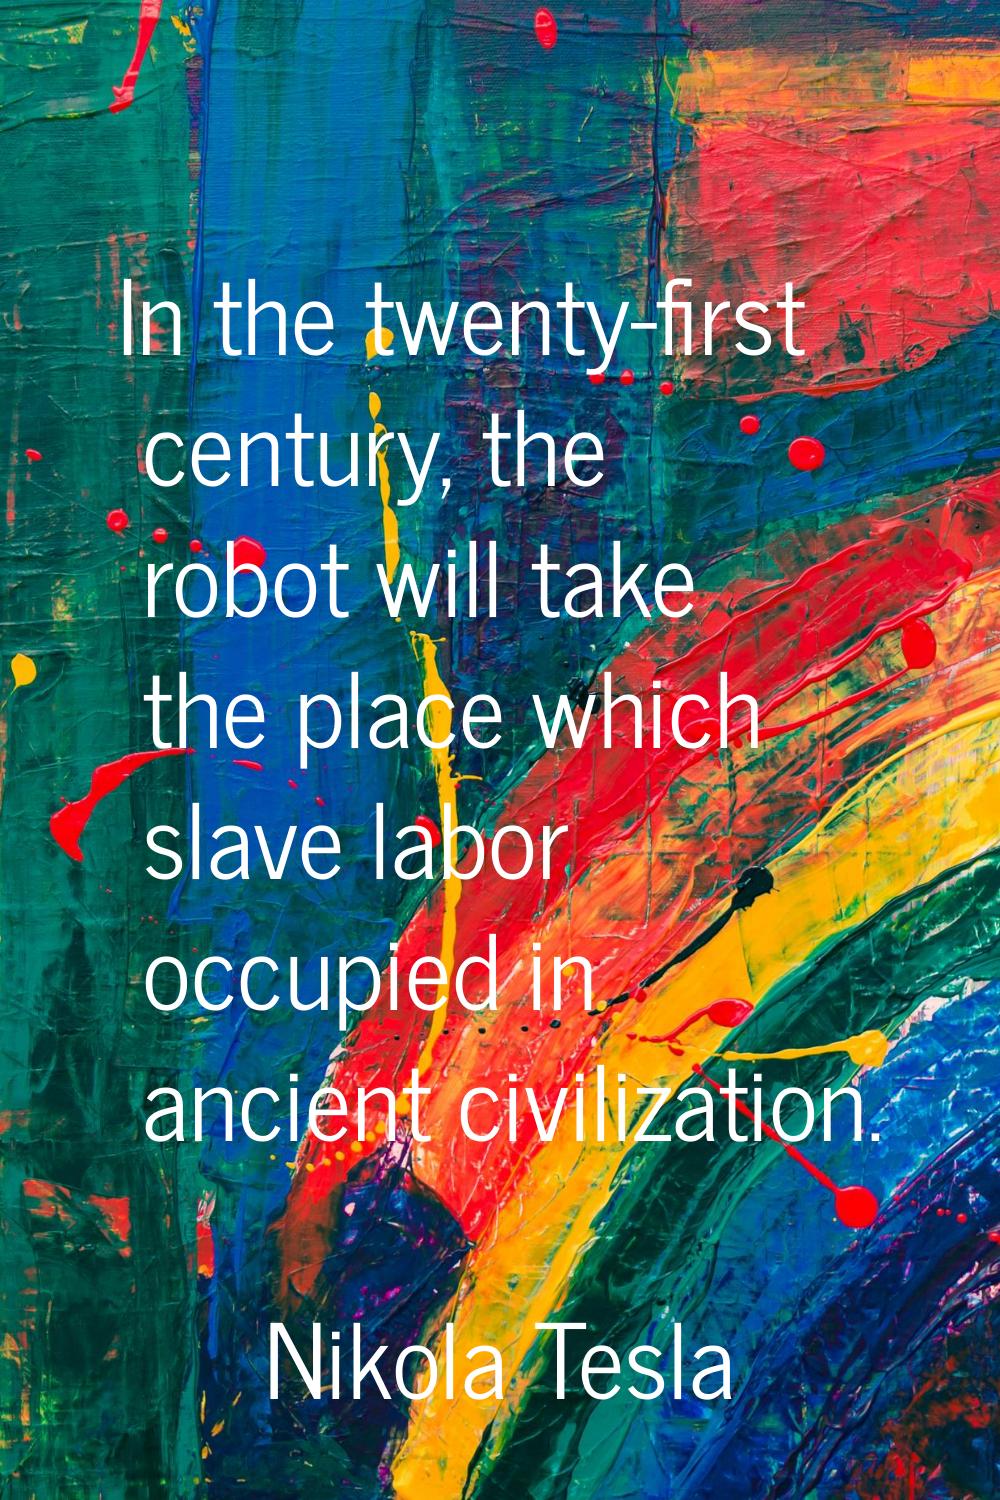 In the twenty-first century, the robot will take the place which slave labor occupied in ancient ci